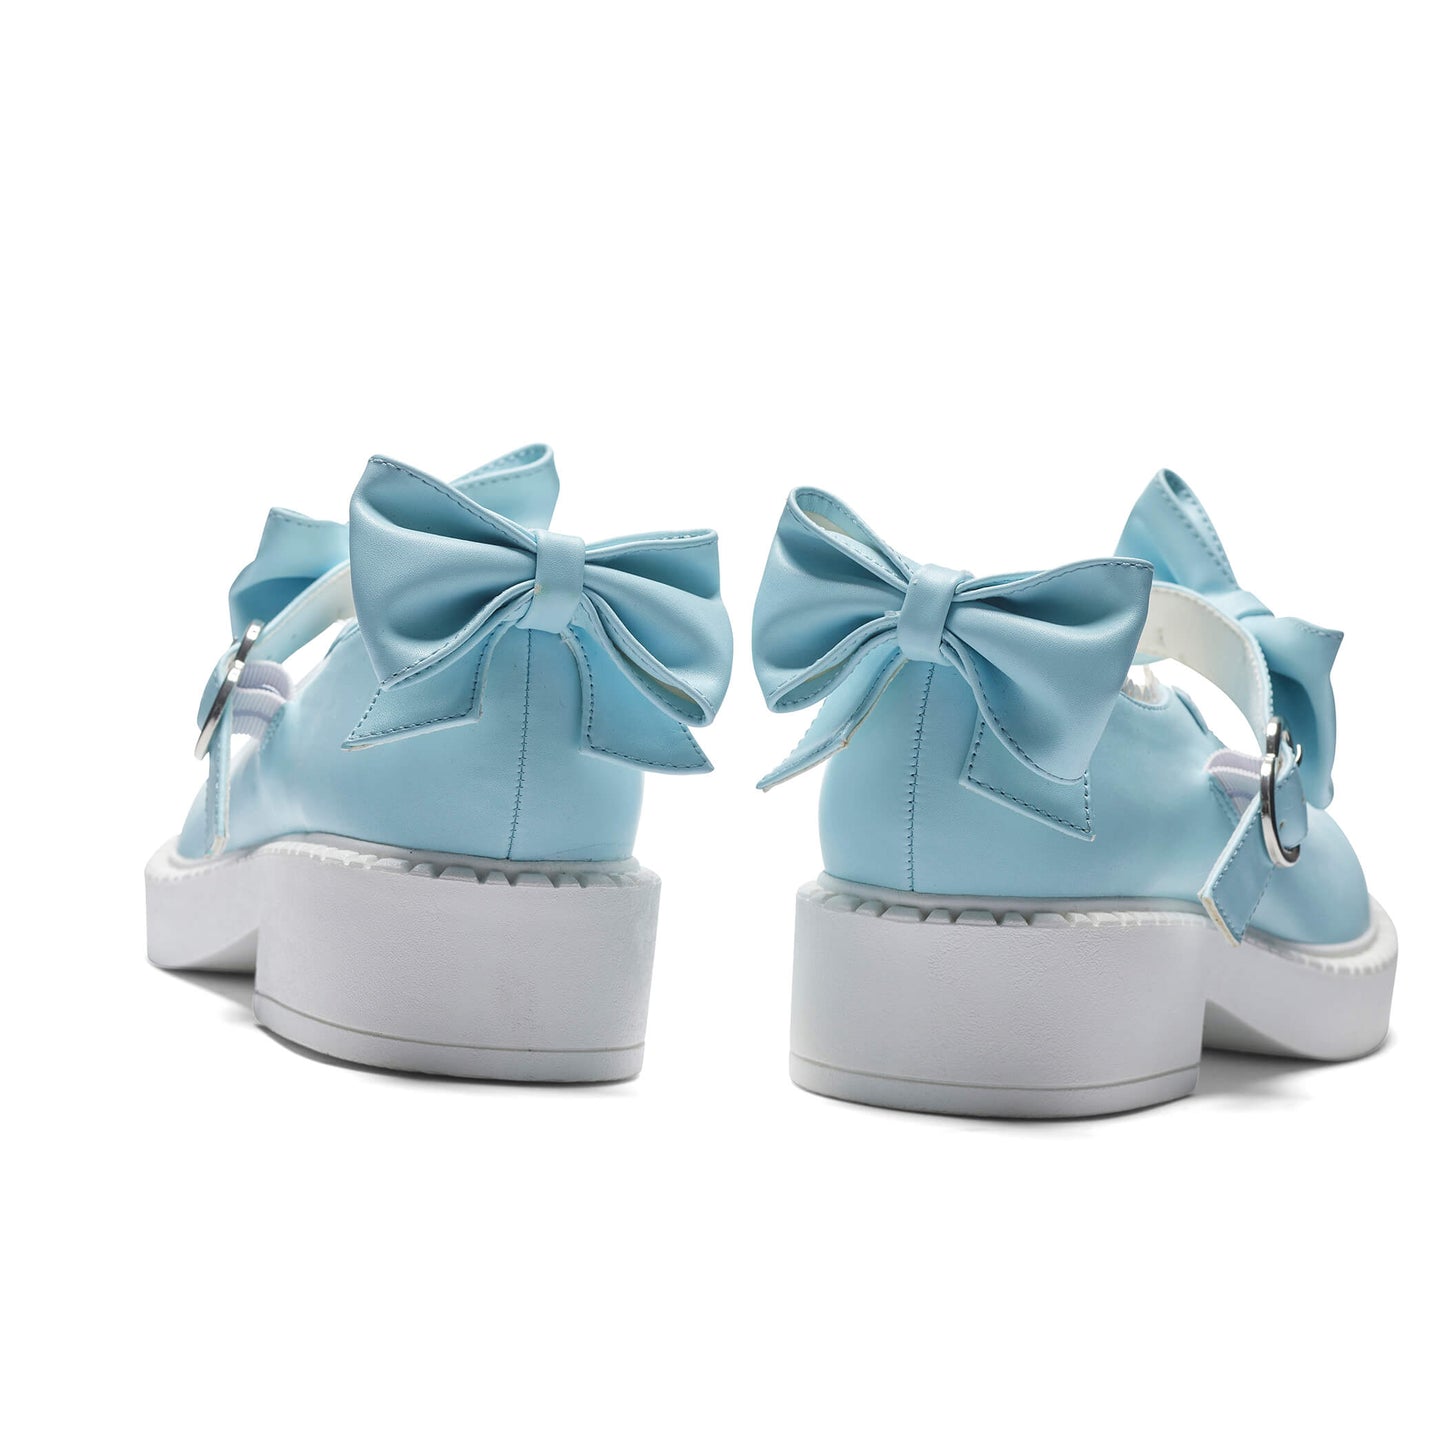 Fairy Lace Doily Mary Janes - Baby Blue - Mary Janes - KOI Footwear - Blue - Back Bow Details